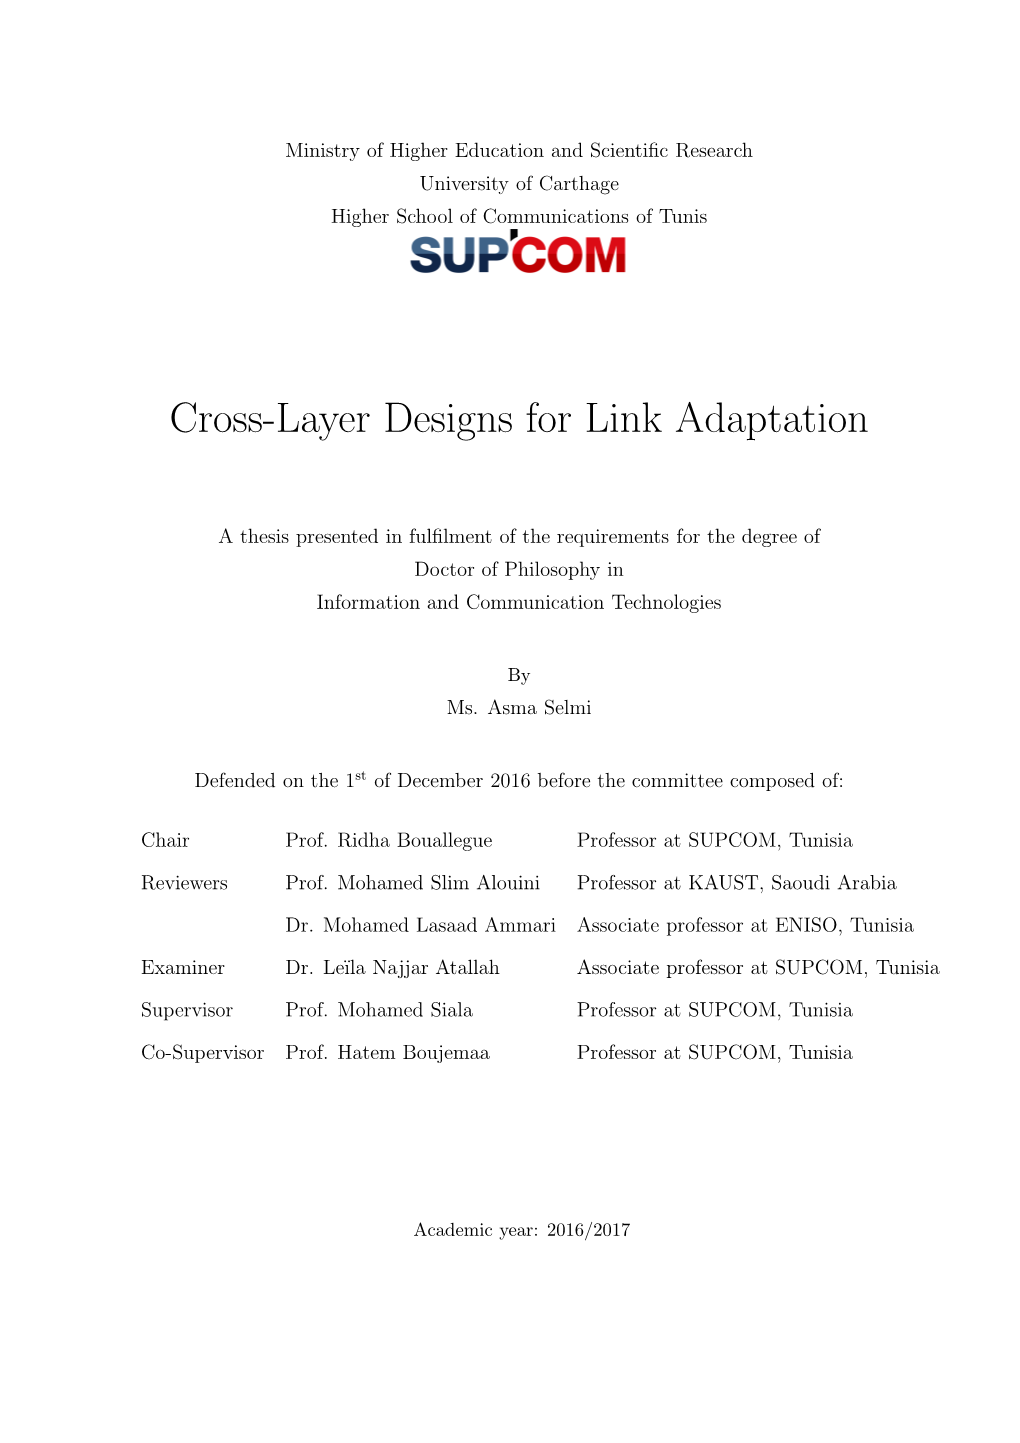 Cross-Layer Designs for Link Adaptation